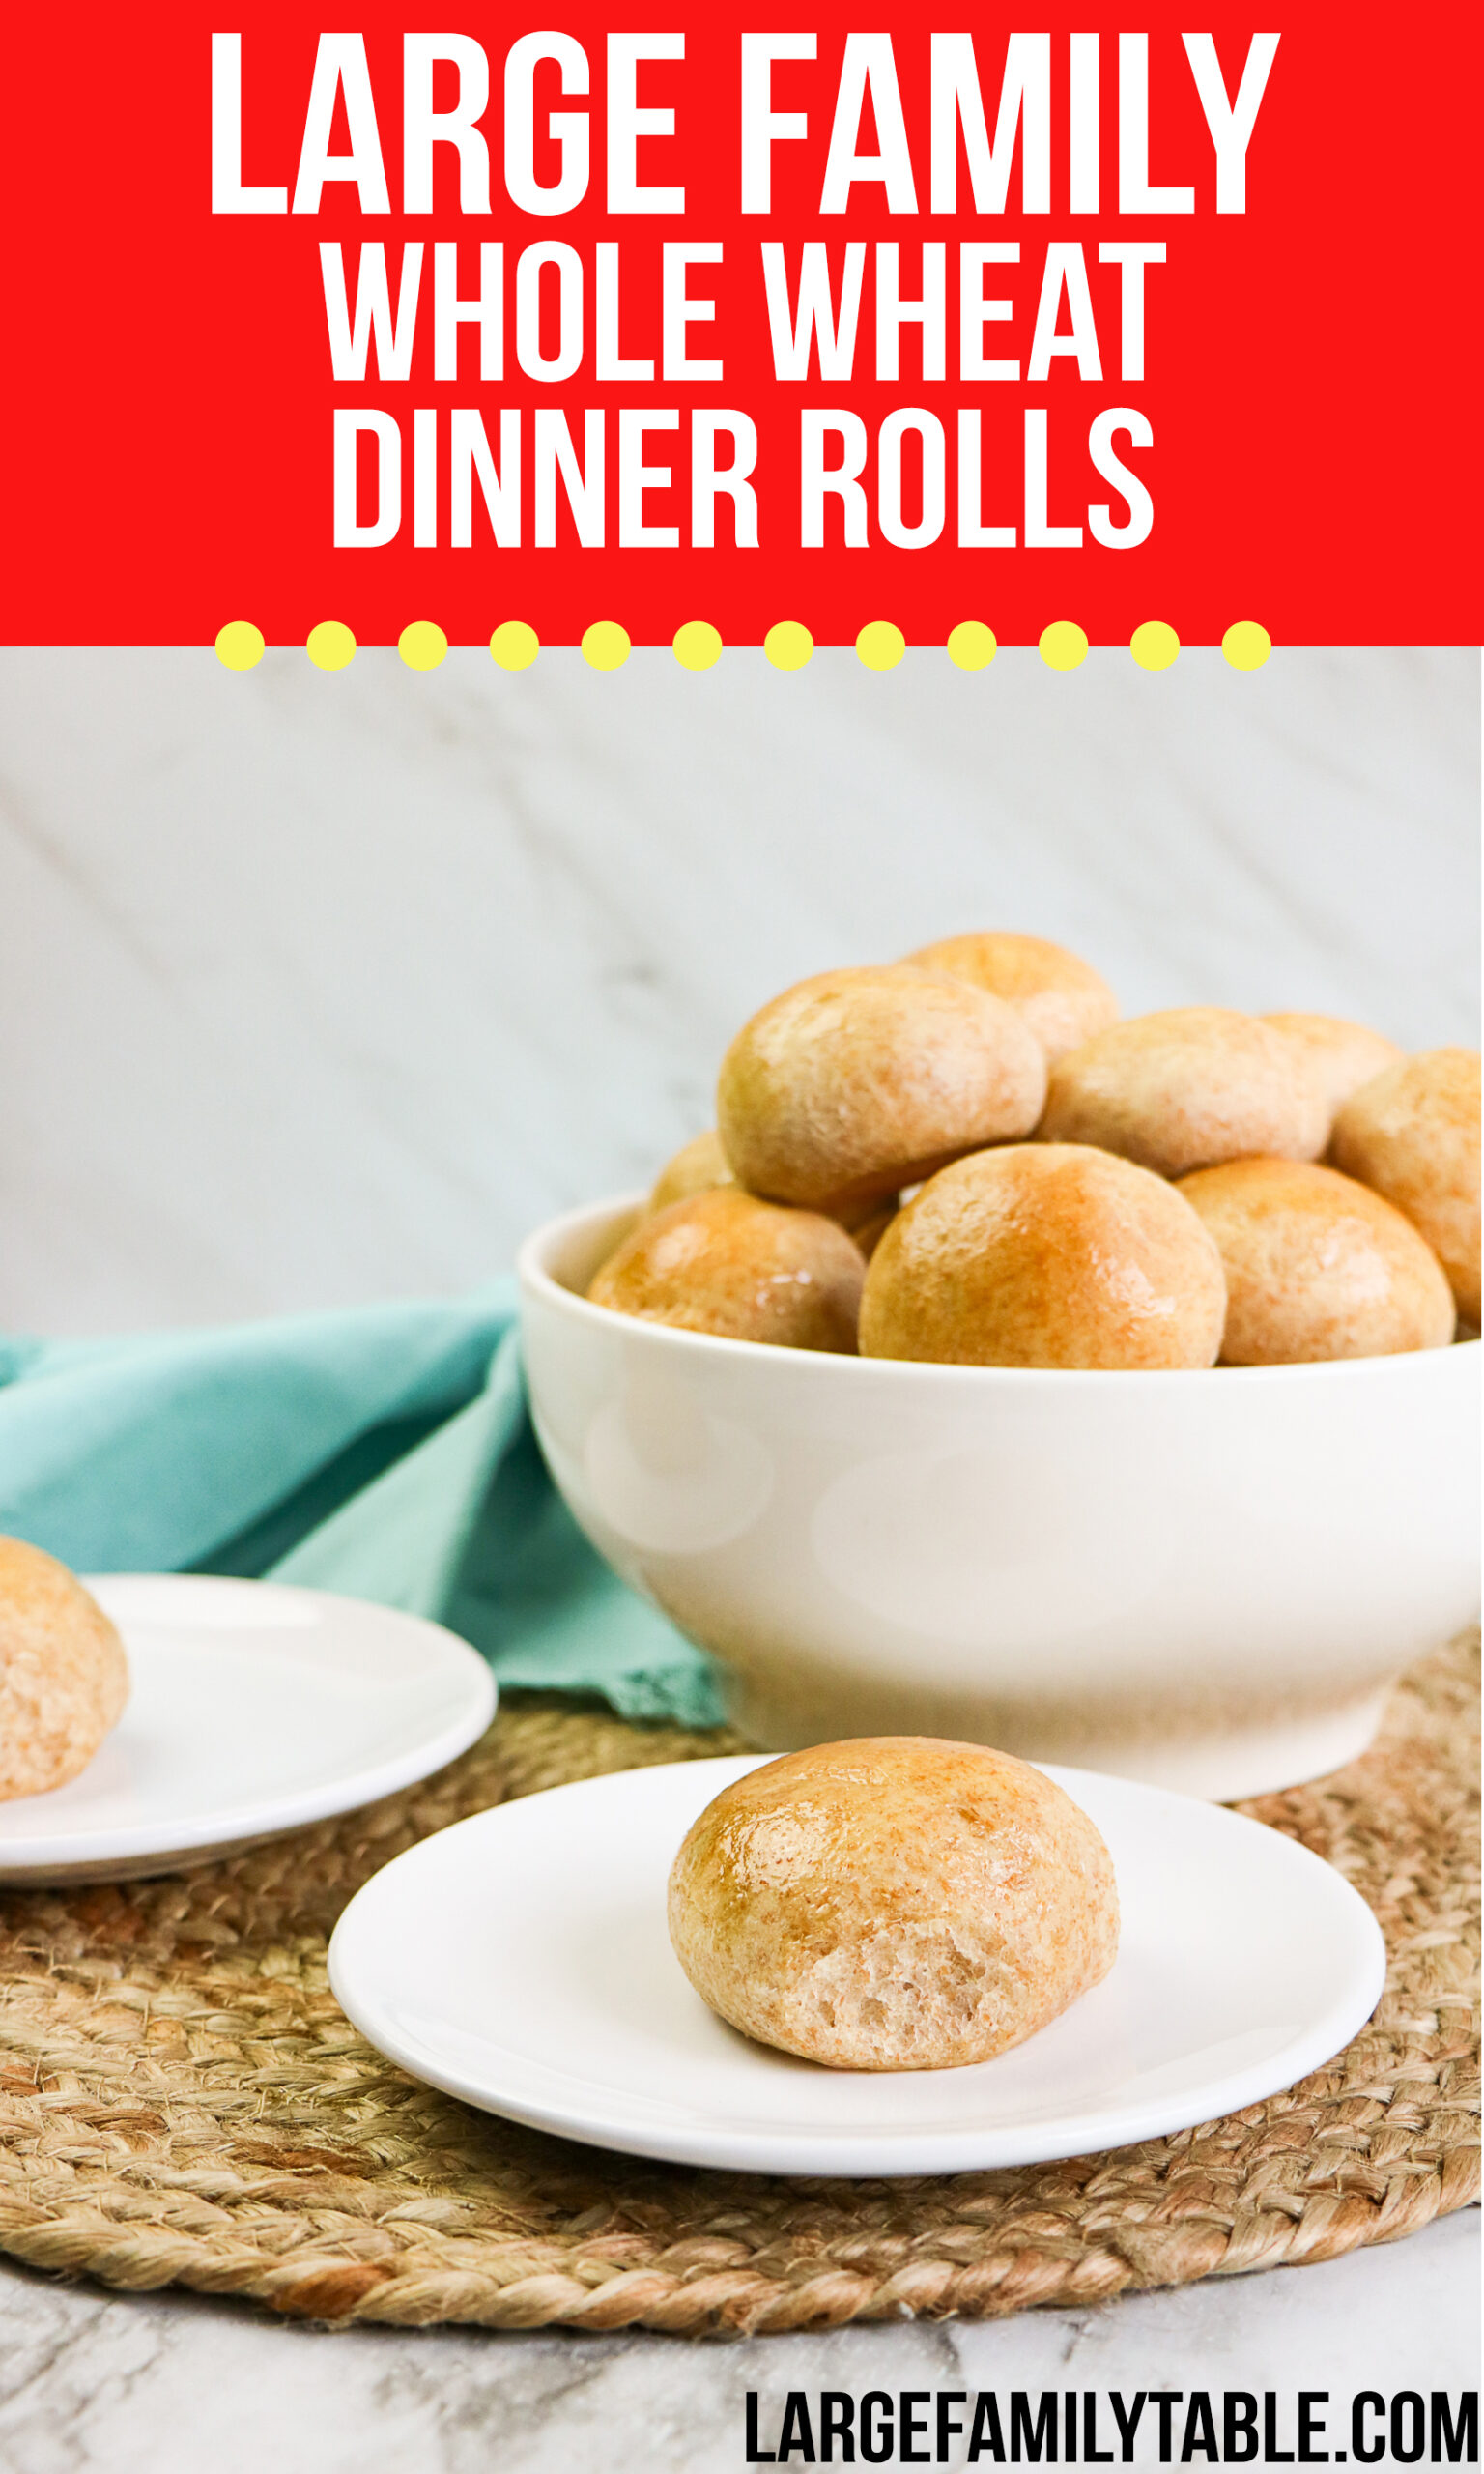 Large-Family-Whole-Wheat-Dinner-Rolls